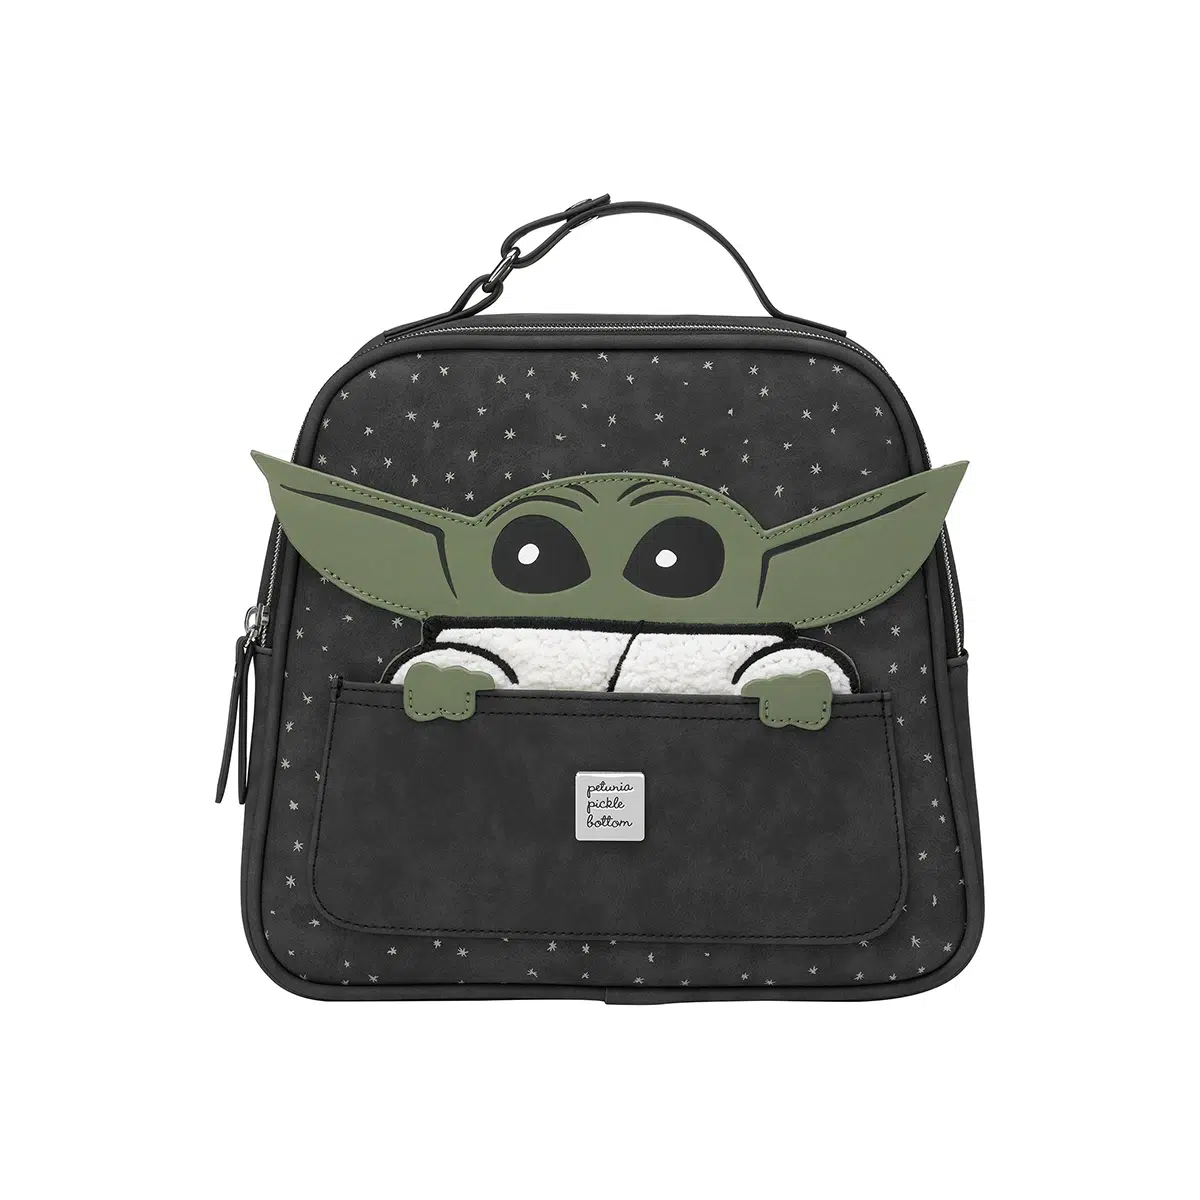 Petunia Pickle Bottom x Star Wars The Child Collection Tandem Insulated Bottle Tote & Lunch Box in Black